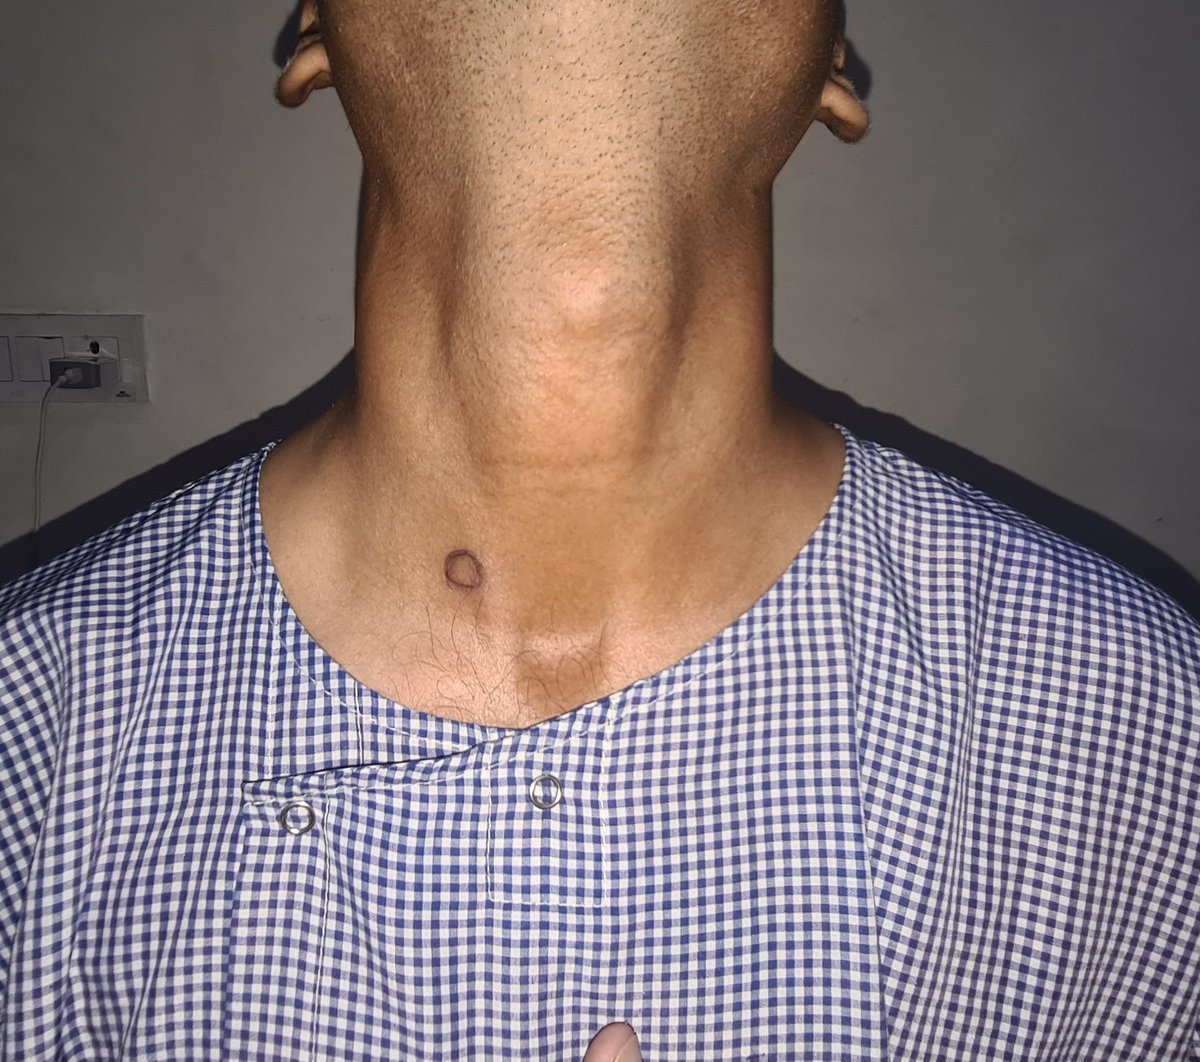 Simple hack to perform Minimally invasive Parathyroid surgery: 

Preoperative skin marking of adenoma by radiologist. Obviates the need to have ultrasound in operating theatre.
Works equally well!! 

#parathyroidsurgery @ParaTroupers1
#MedTwitter @IAESurgeons